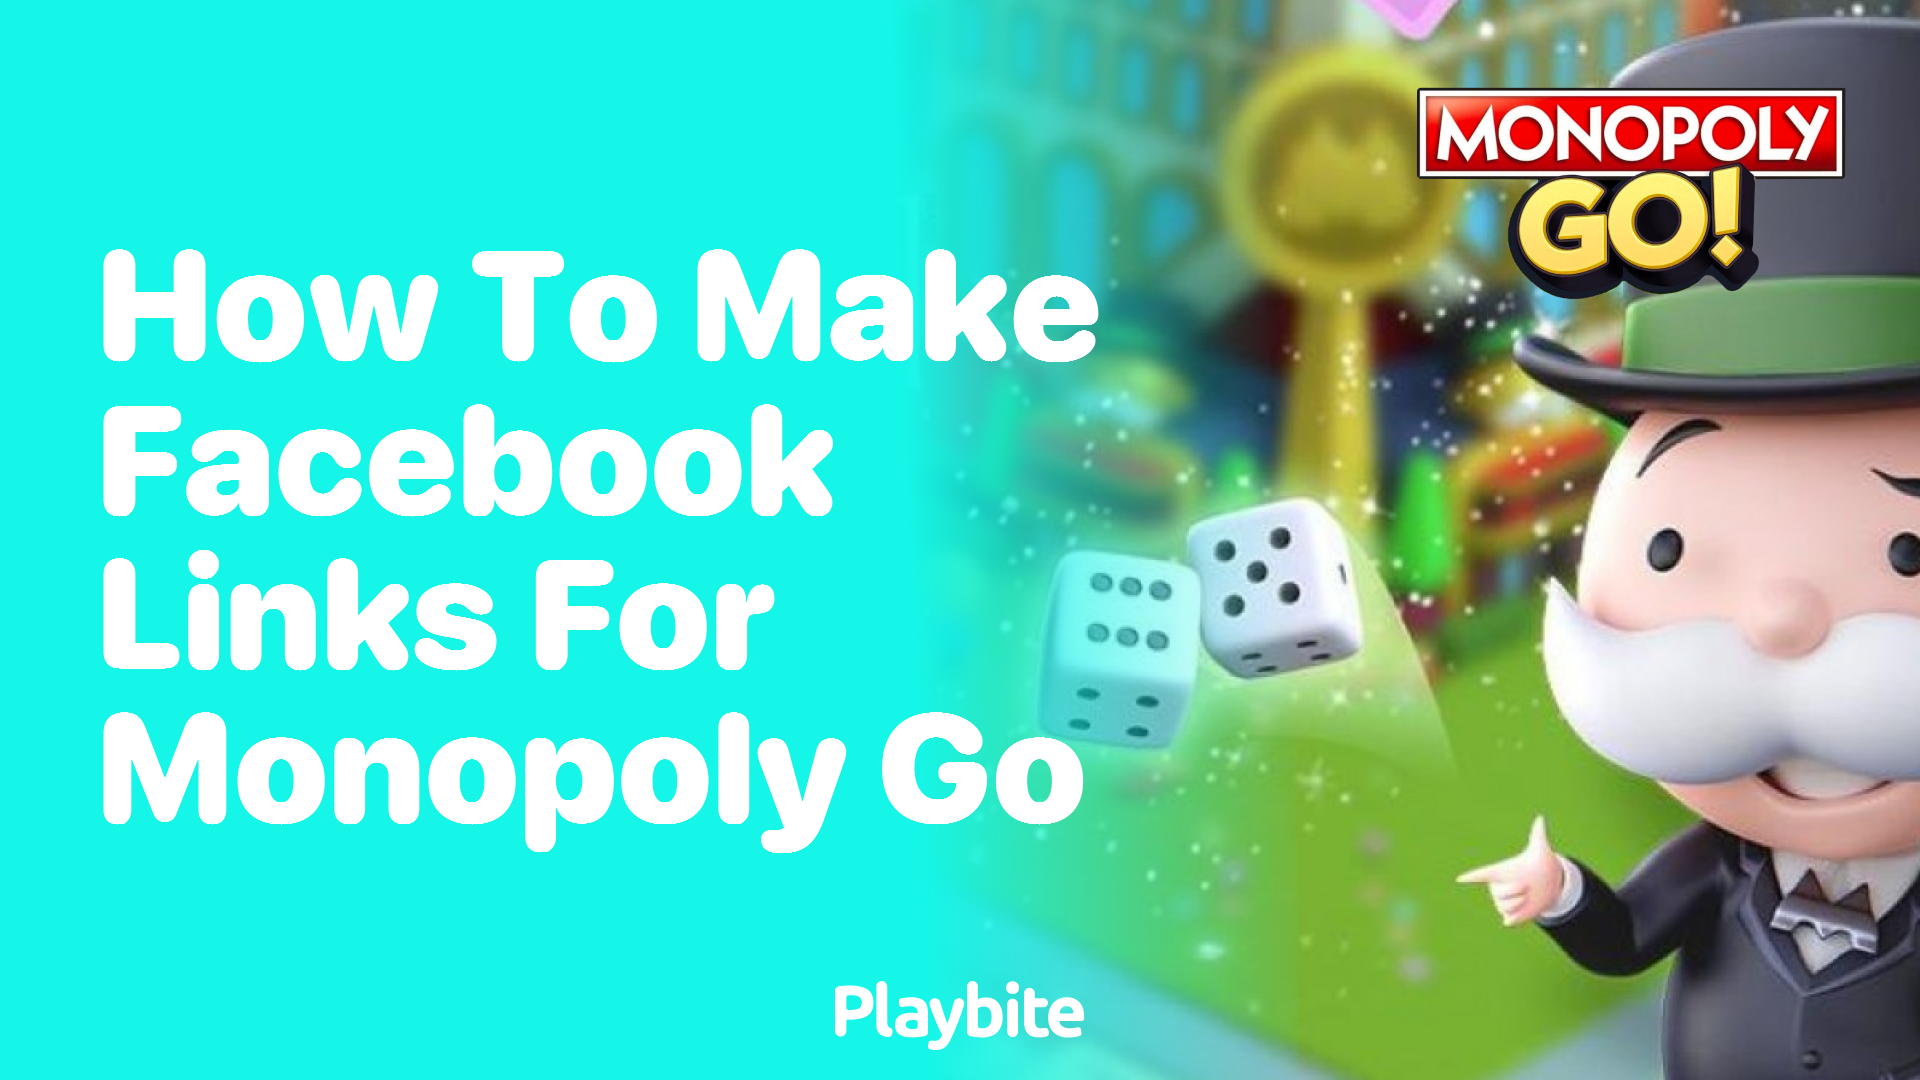 How to Make Facebook Links for Monopoly Go